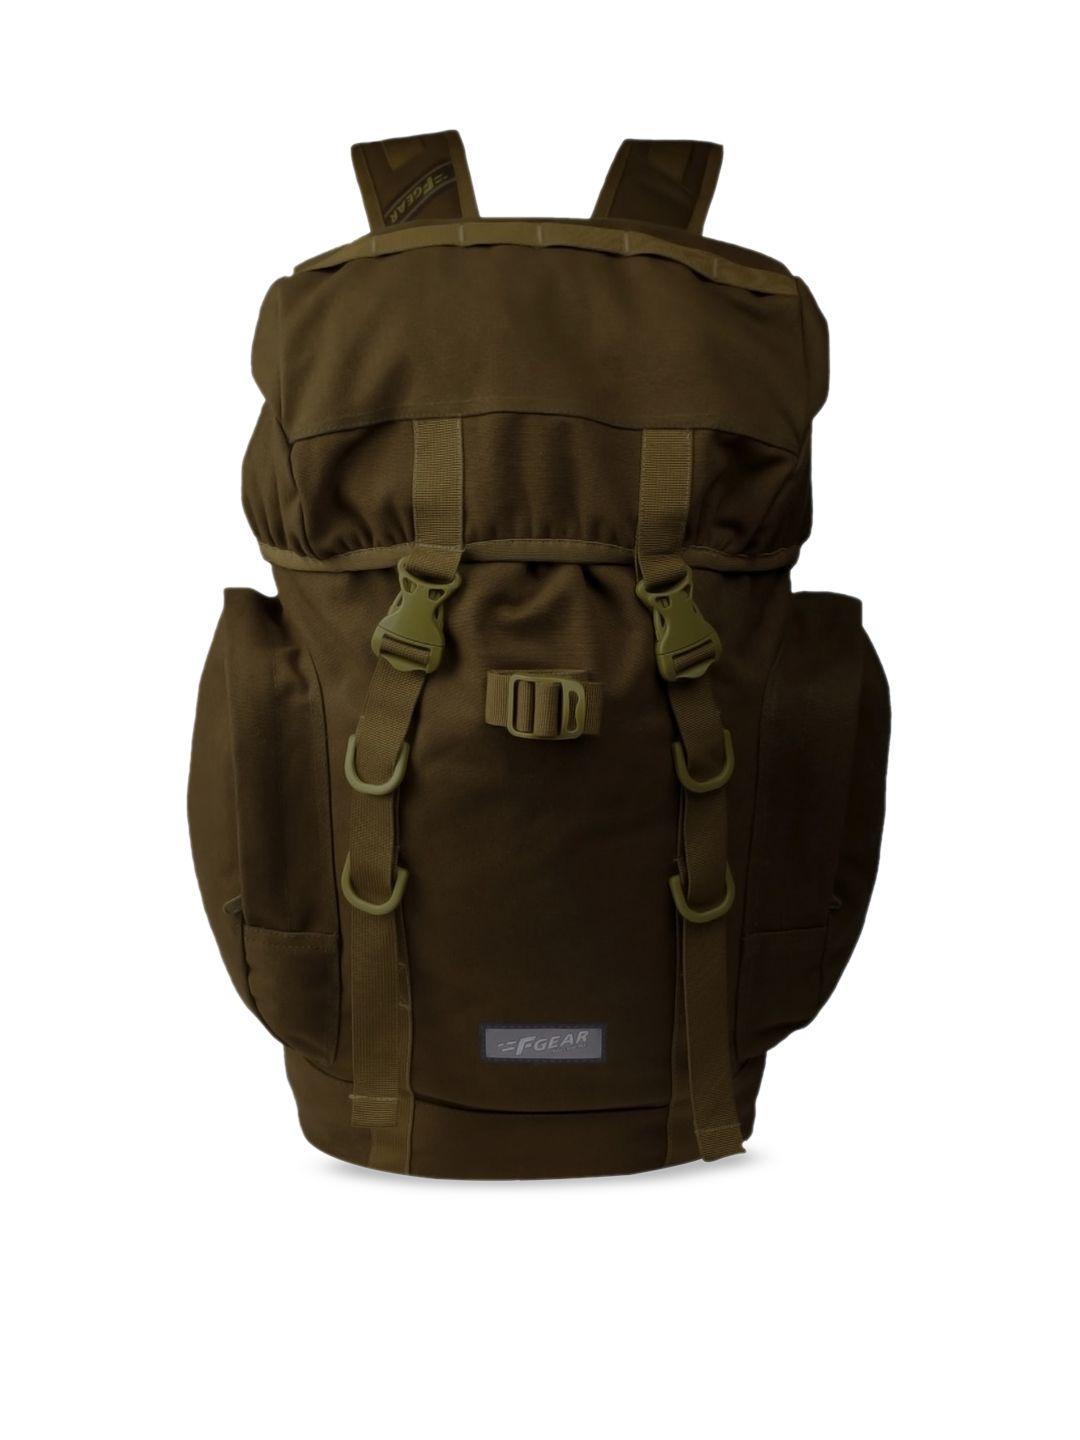 f gear unisex olive brown solid backpack